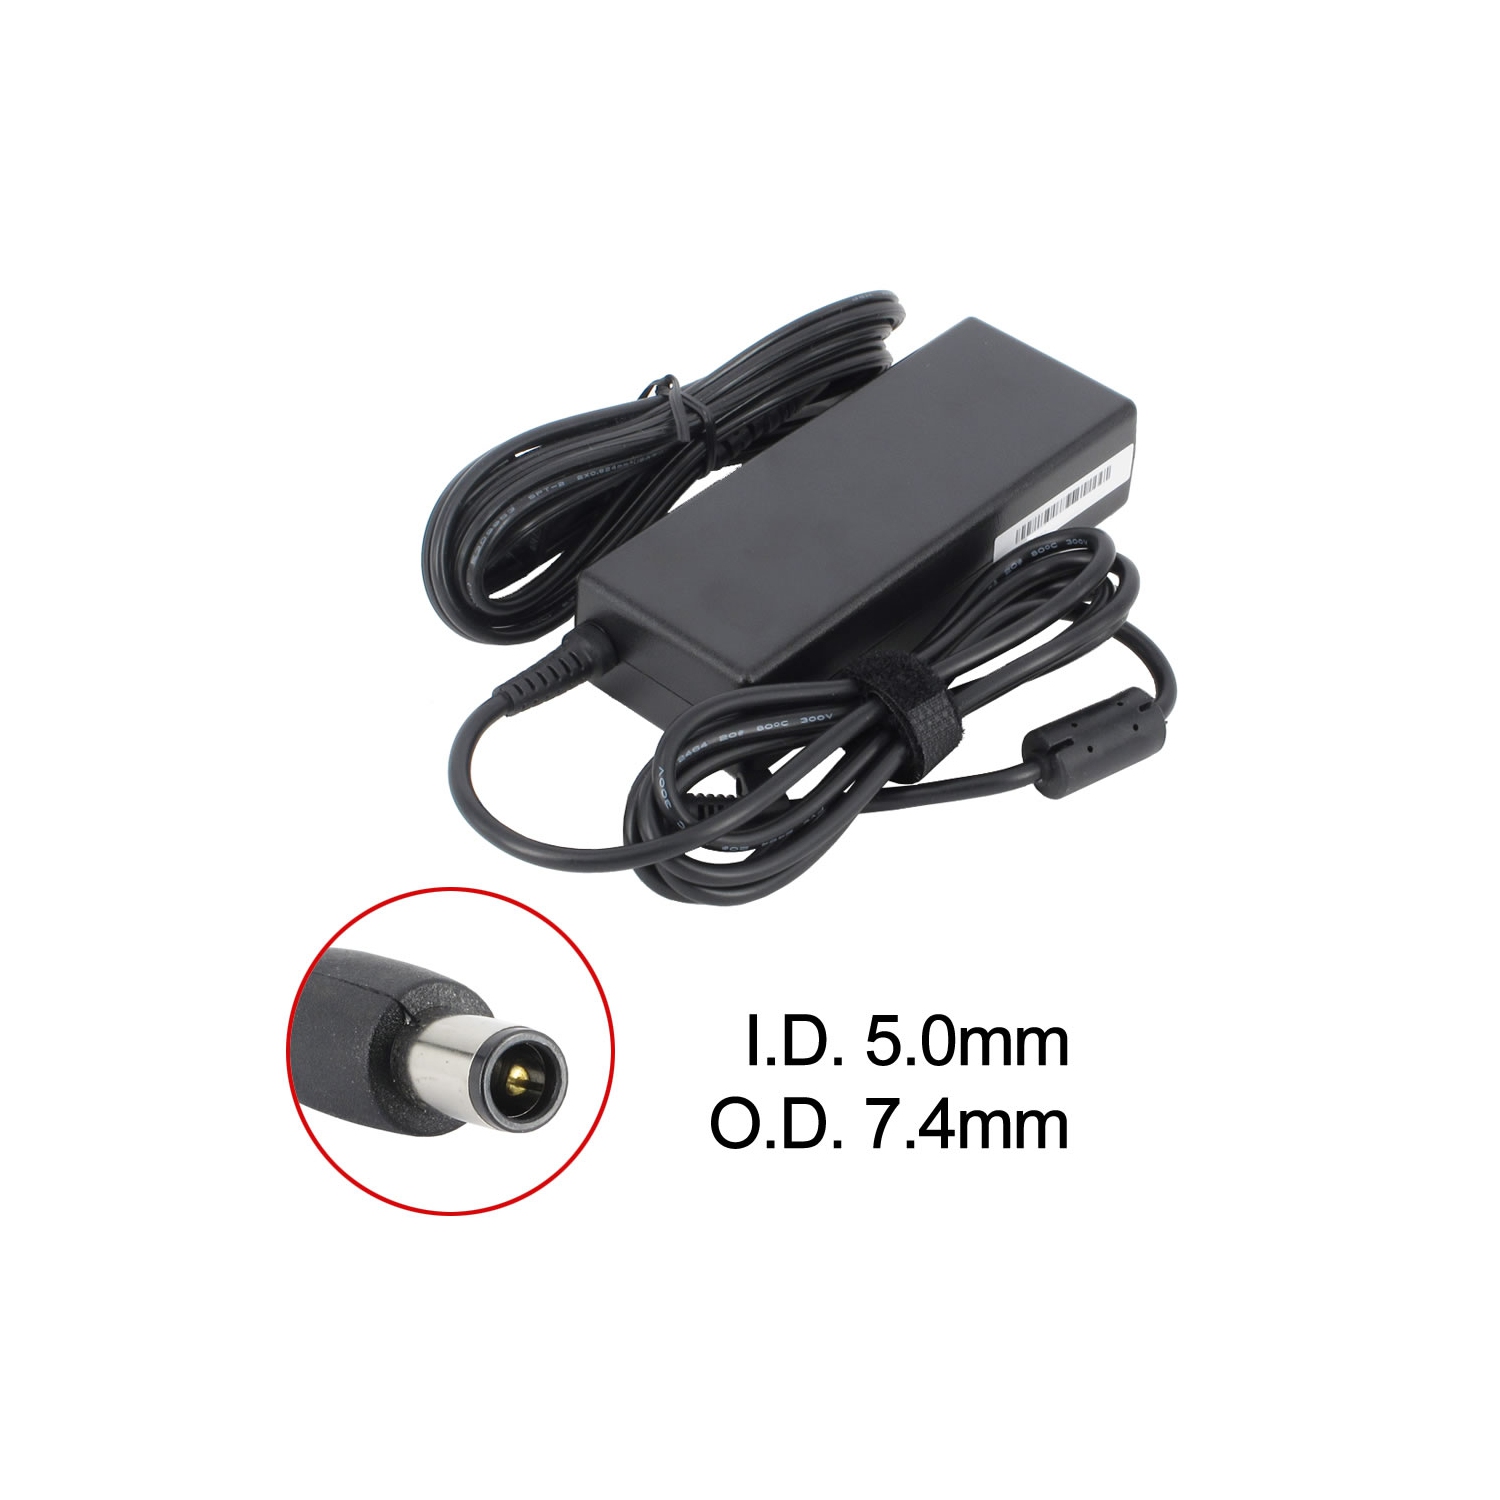 New Laptop AC Adapter for Dell Latitude E6430, 1X917, 310-7743, 330-0946, A065R007L, DF398, HA90NM130, PA-1650-05D, Y596G